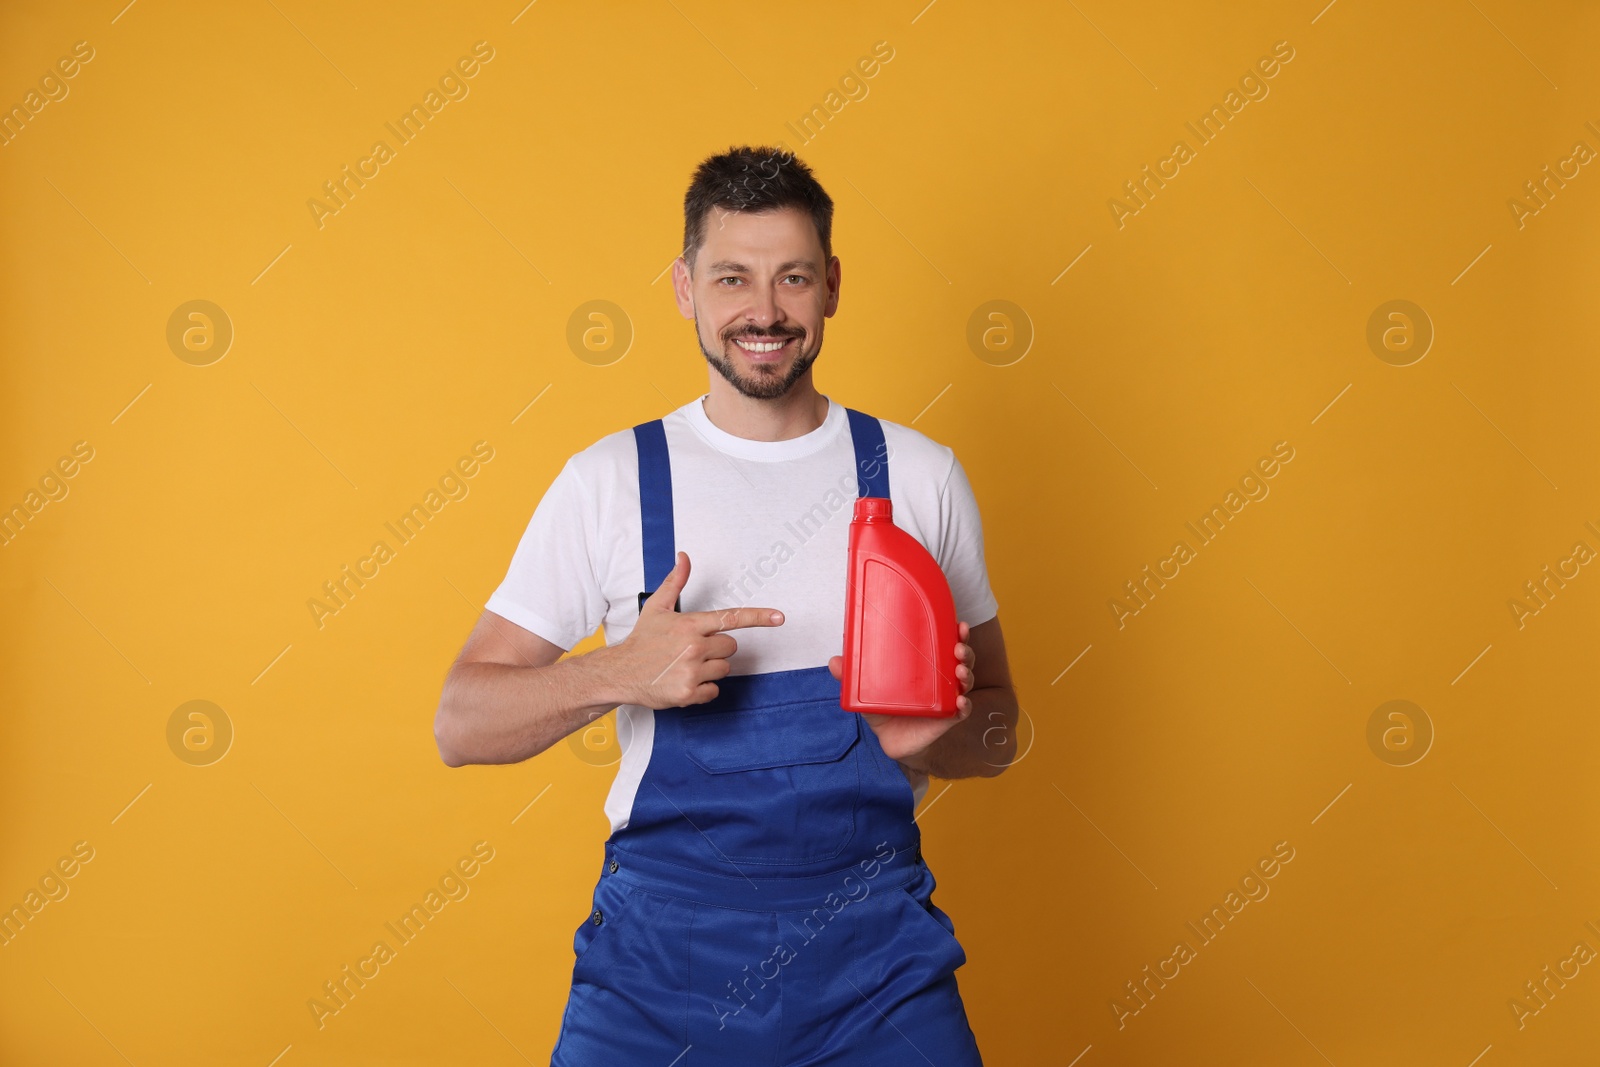 Photo of Man pointing at red container of motor oil on orange background